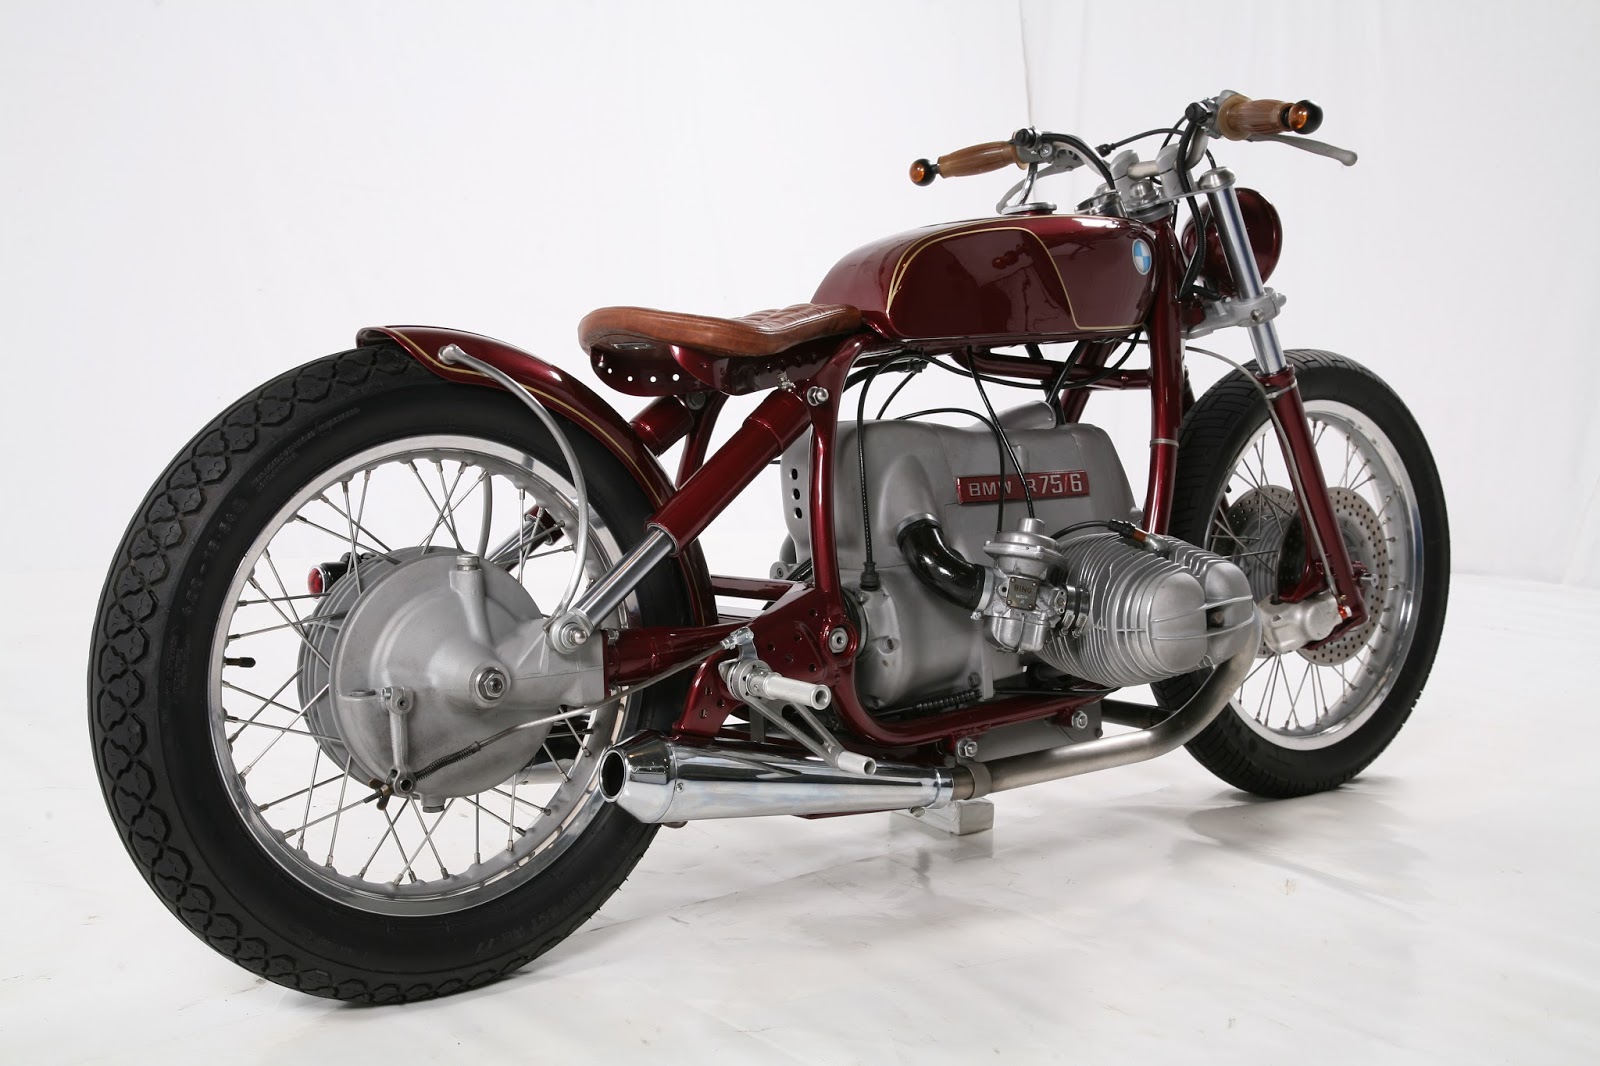 A look at Bobber and Chopper Motorcycles image